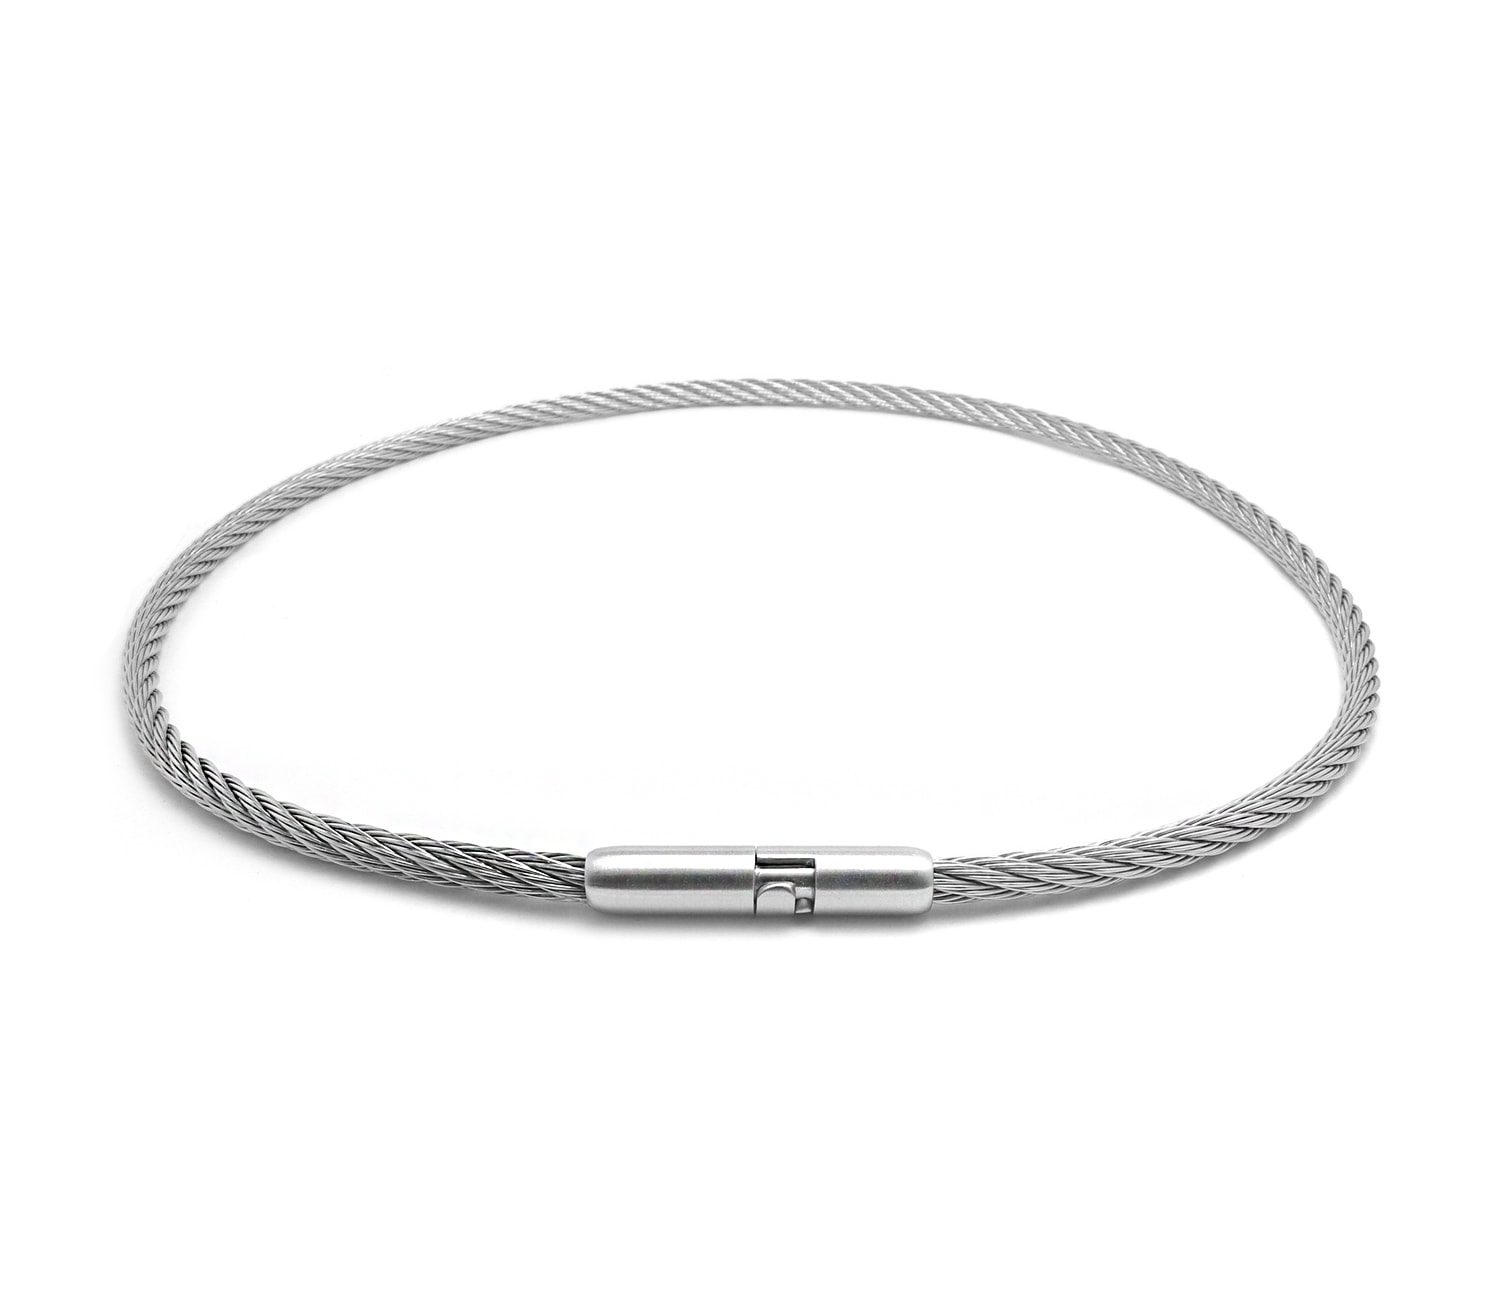 3 mm Stainless Steel Cable Wire Necklace with Bayonet Clasp by